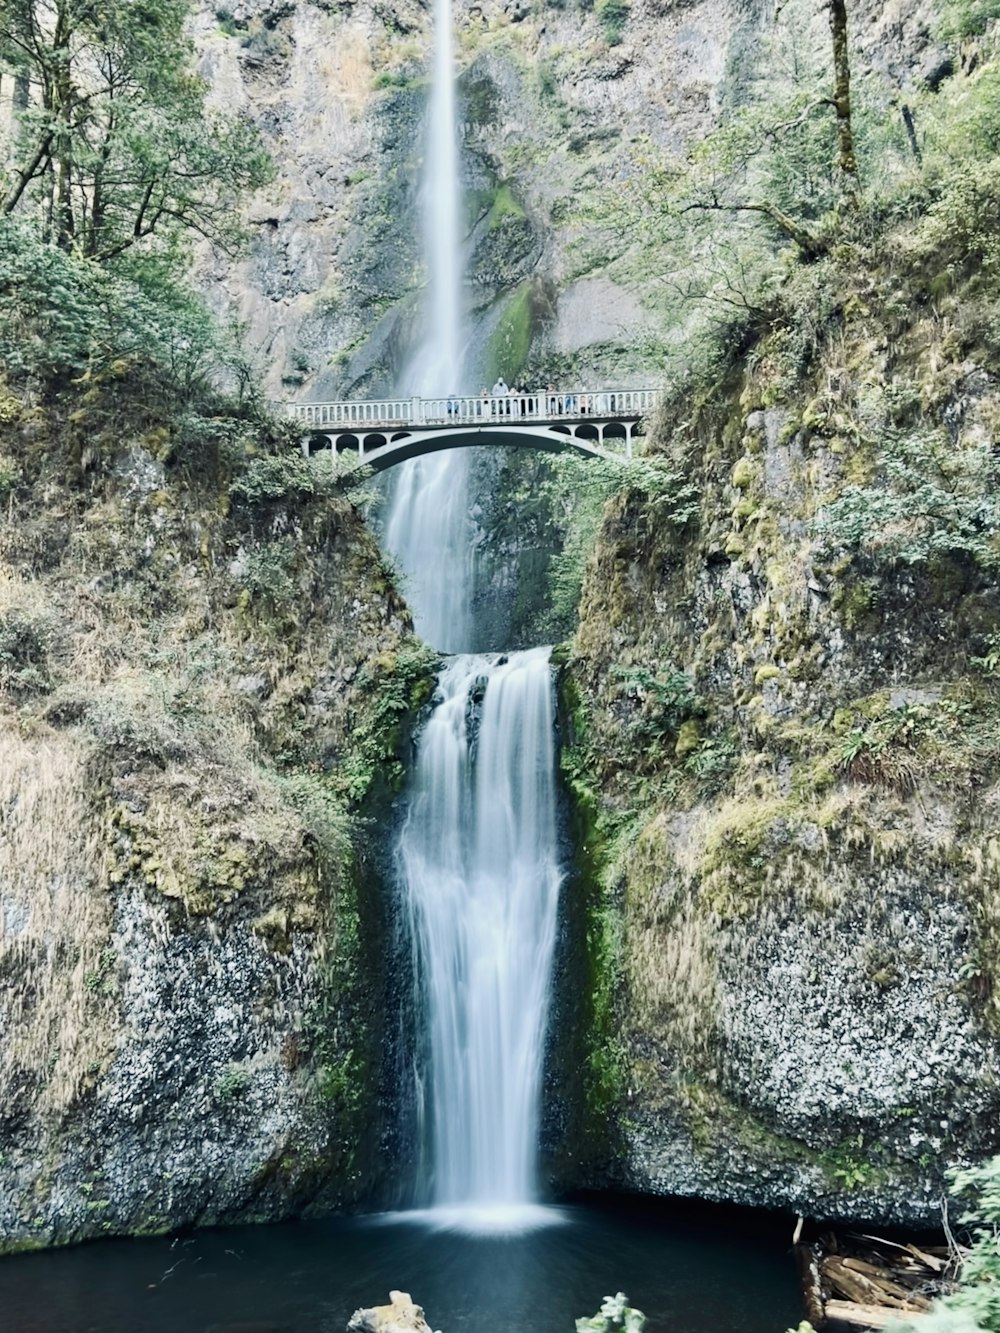 a large waterfall with a bridge over it